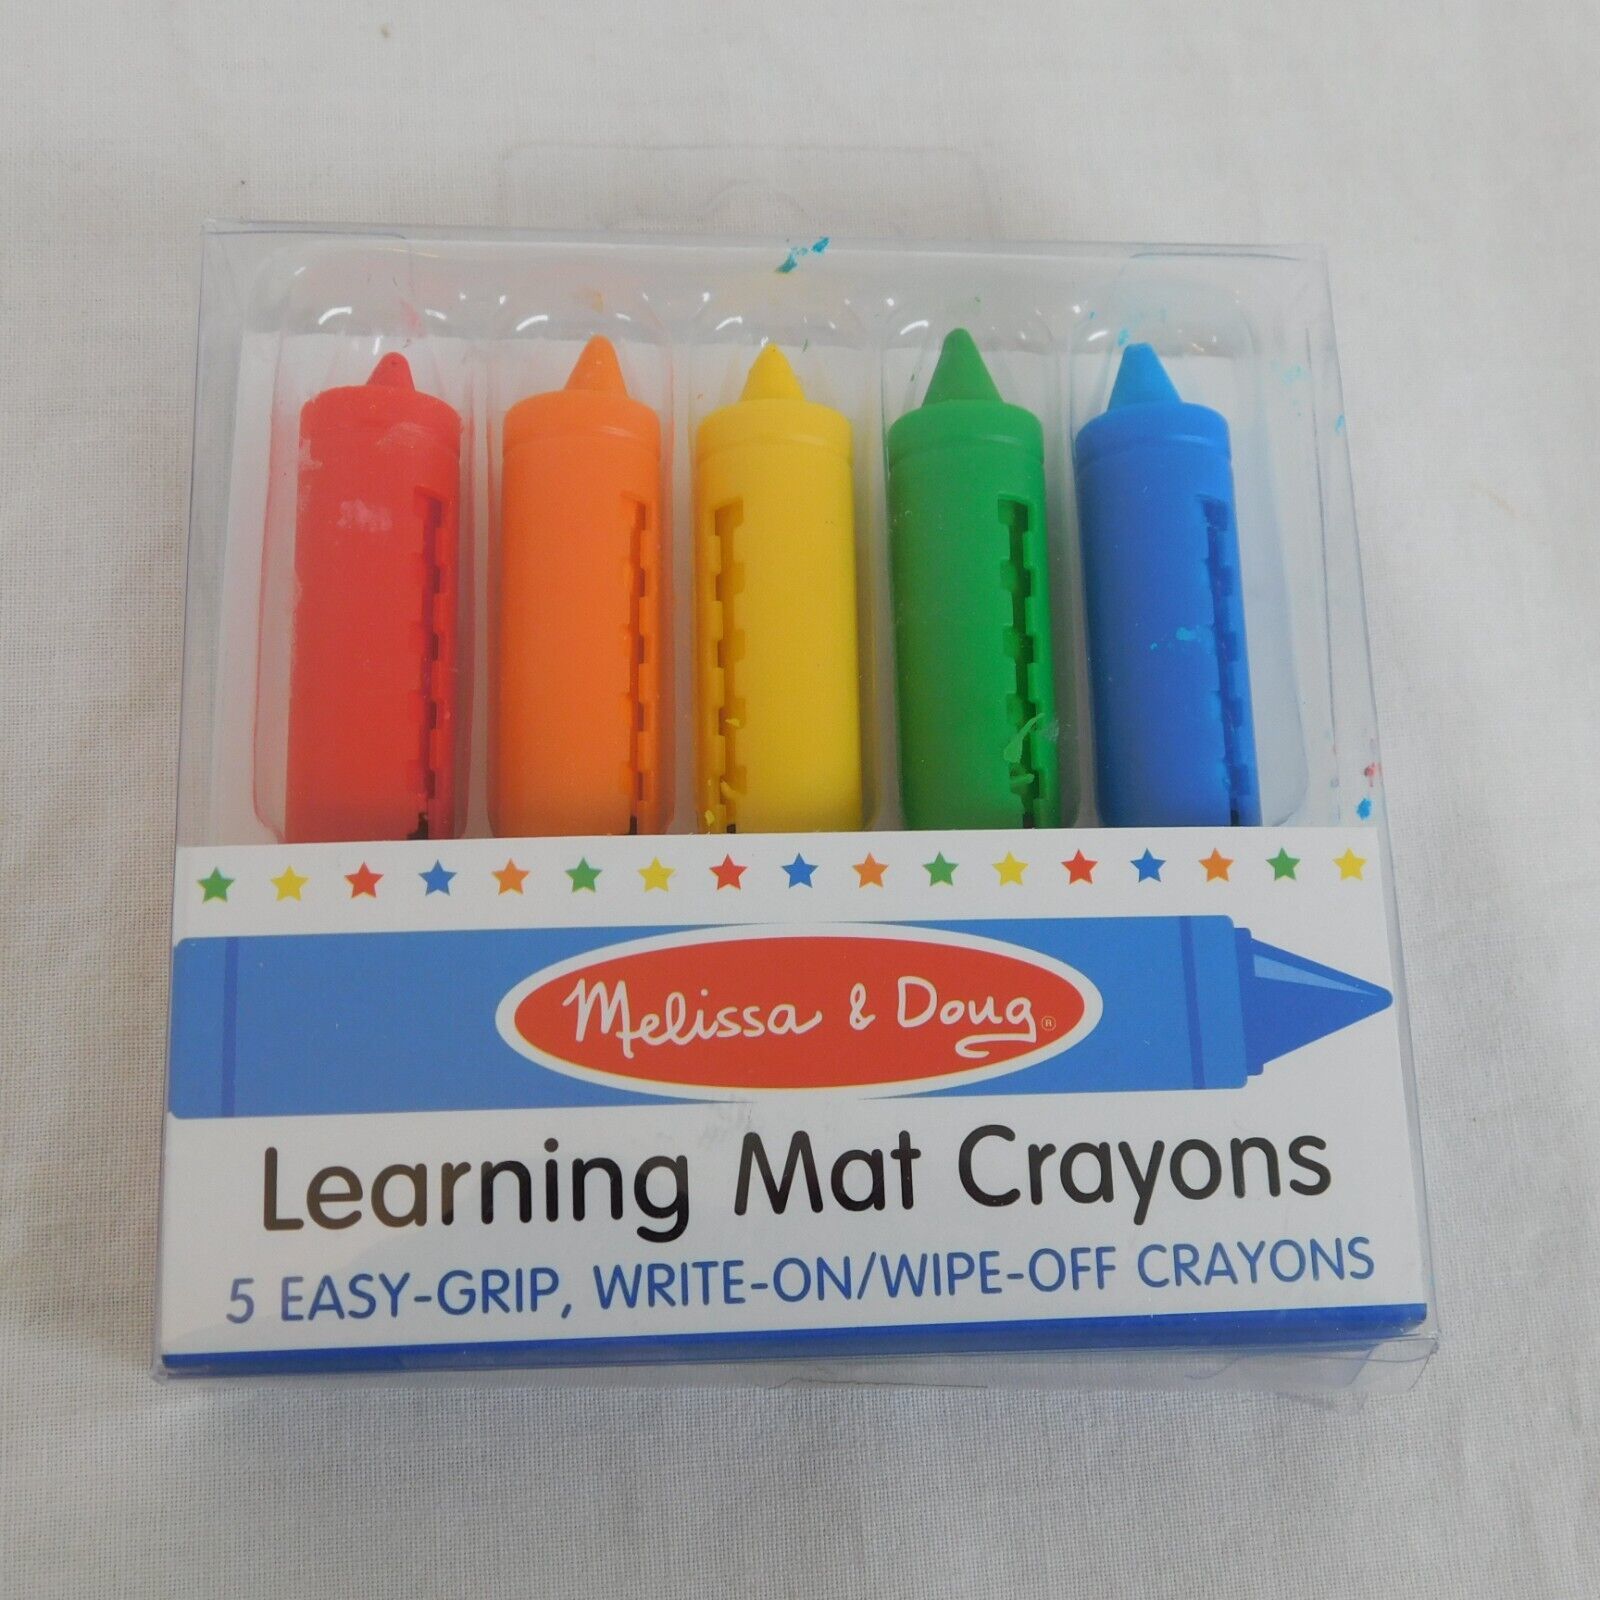 Melissa & Doug Learning Mat Crayons 5 Colors Easy-Grip Write-On Wipe-Off Crayons - $4.00